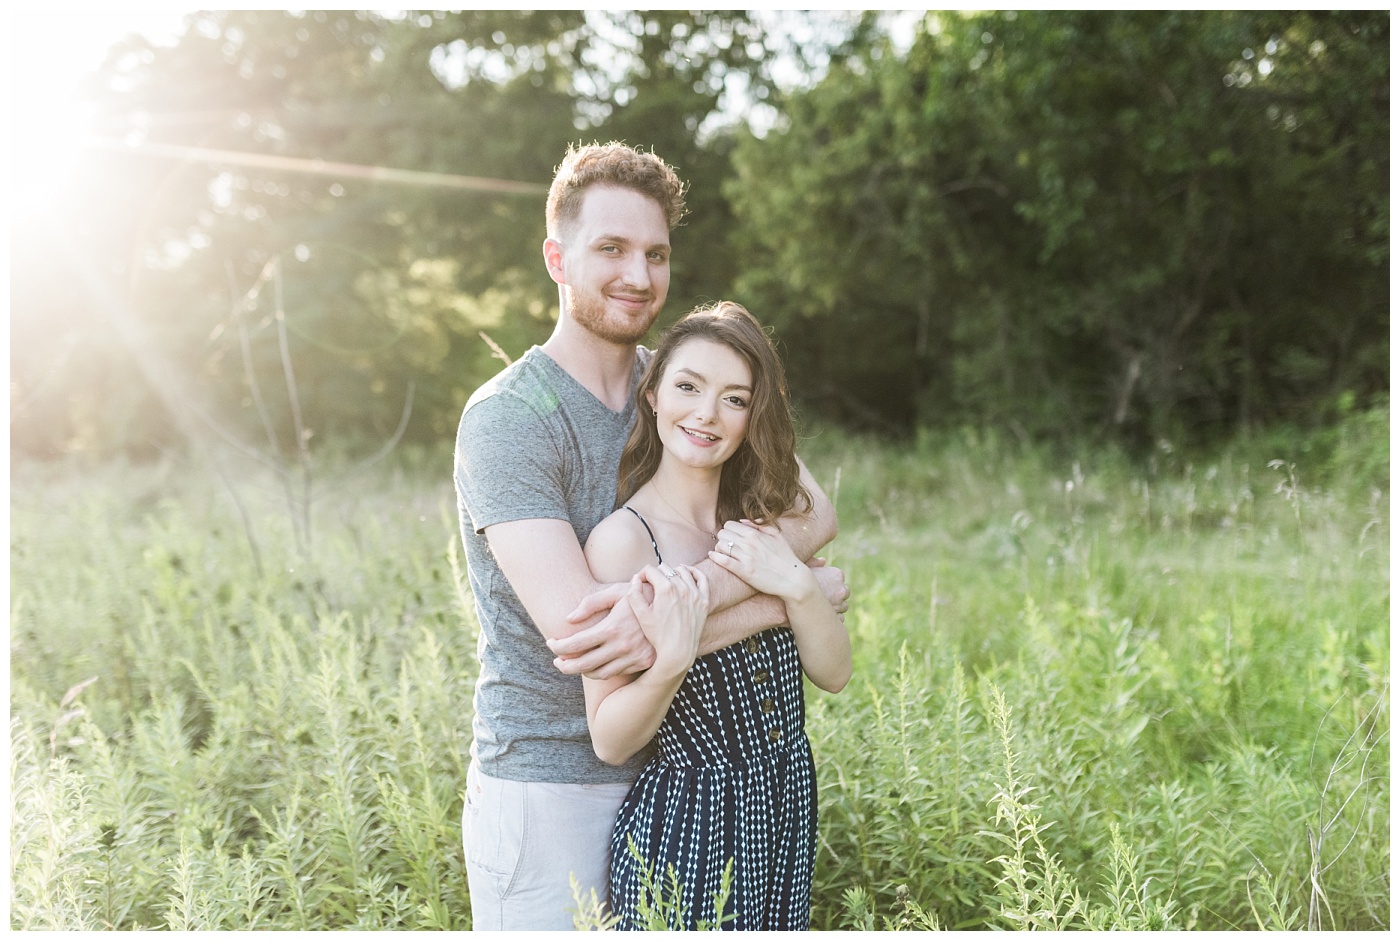 Stephanie Marie Photography Labor for Love Downtown North Liberty Engagement Session Iowa City Wedding Photographer Devin Cody_0013.jpg